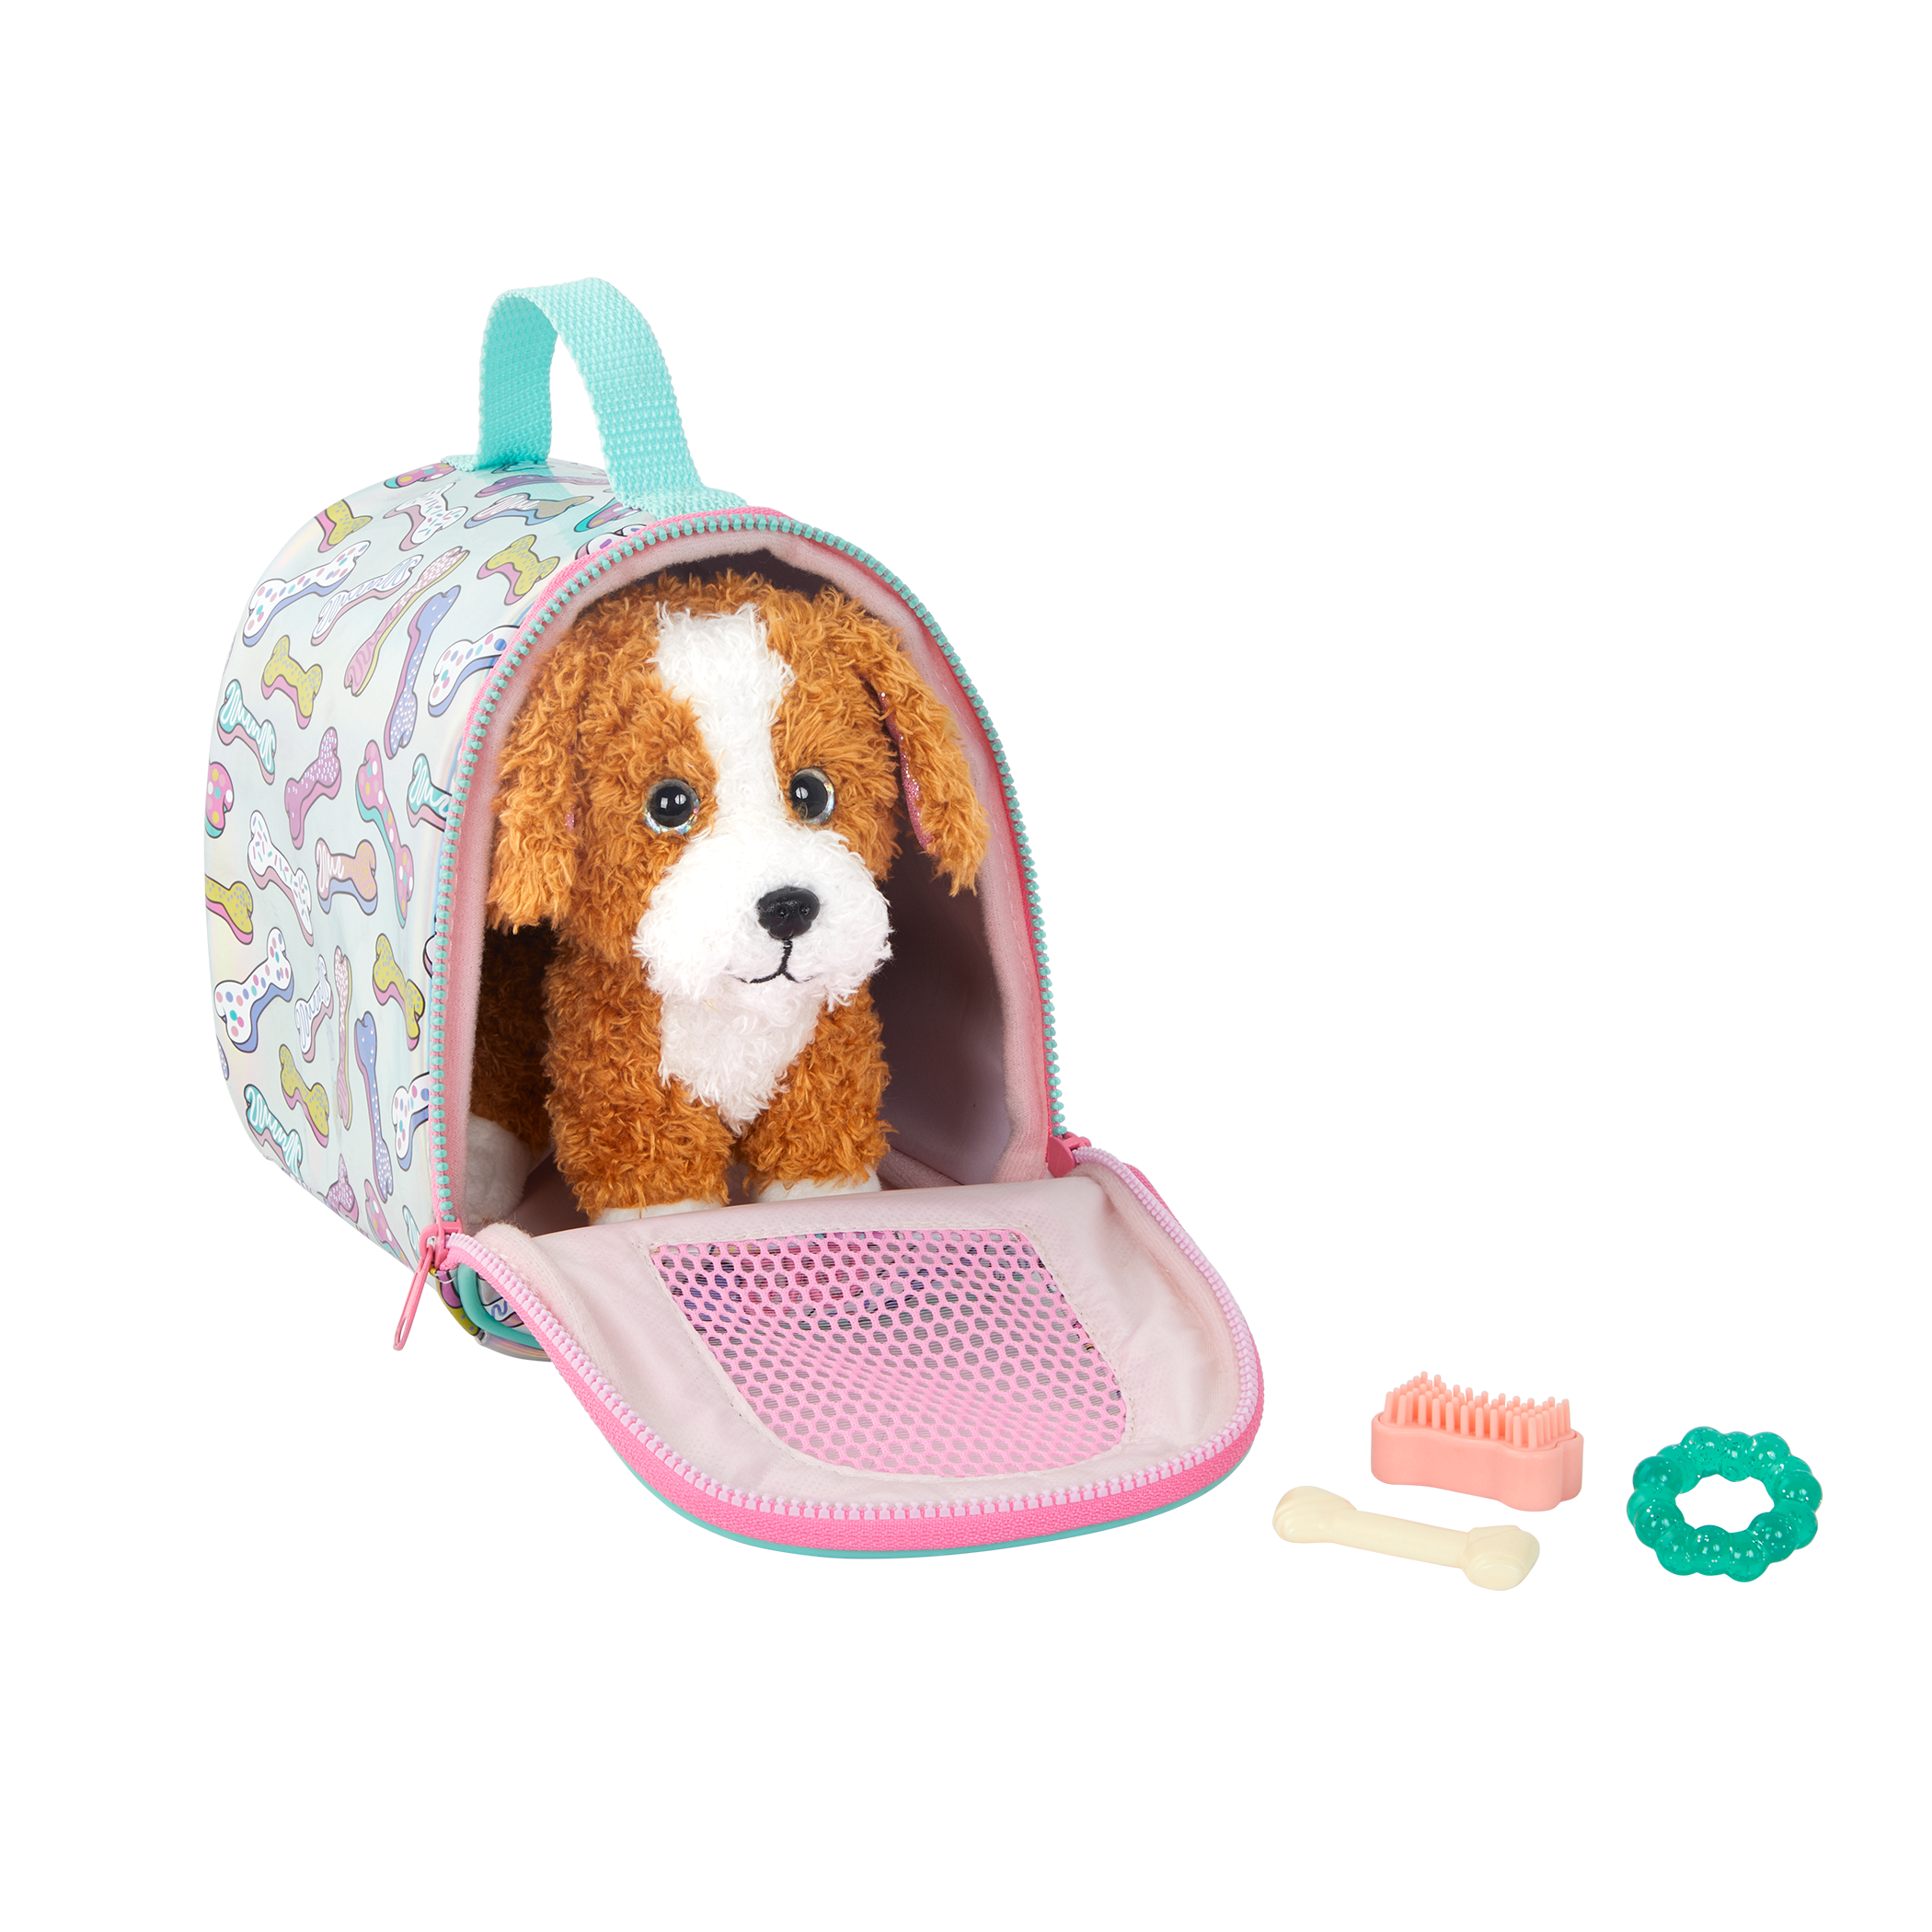 Small Pet Shop Toy Dog + Carrying Case Kids Cute Puppy Stuffed